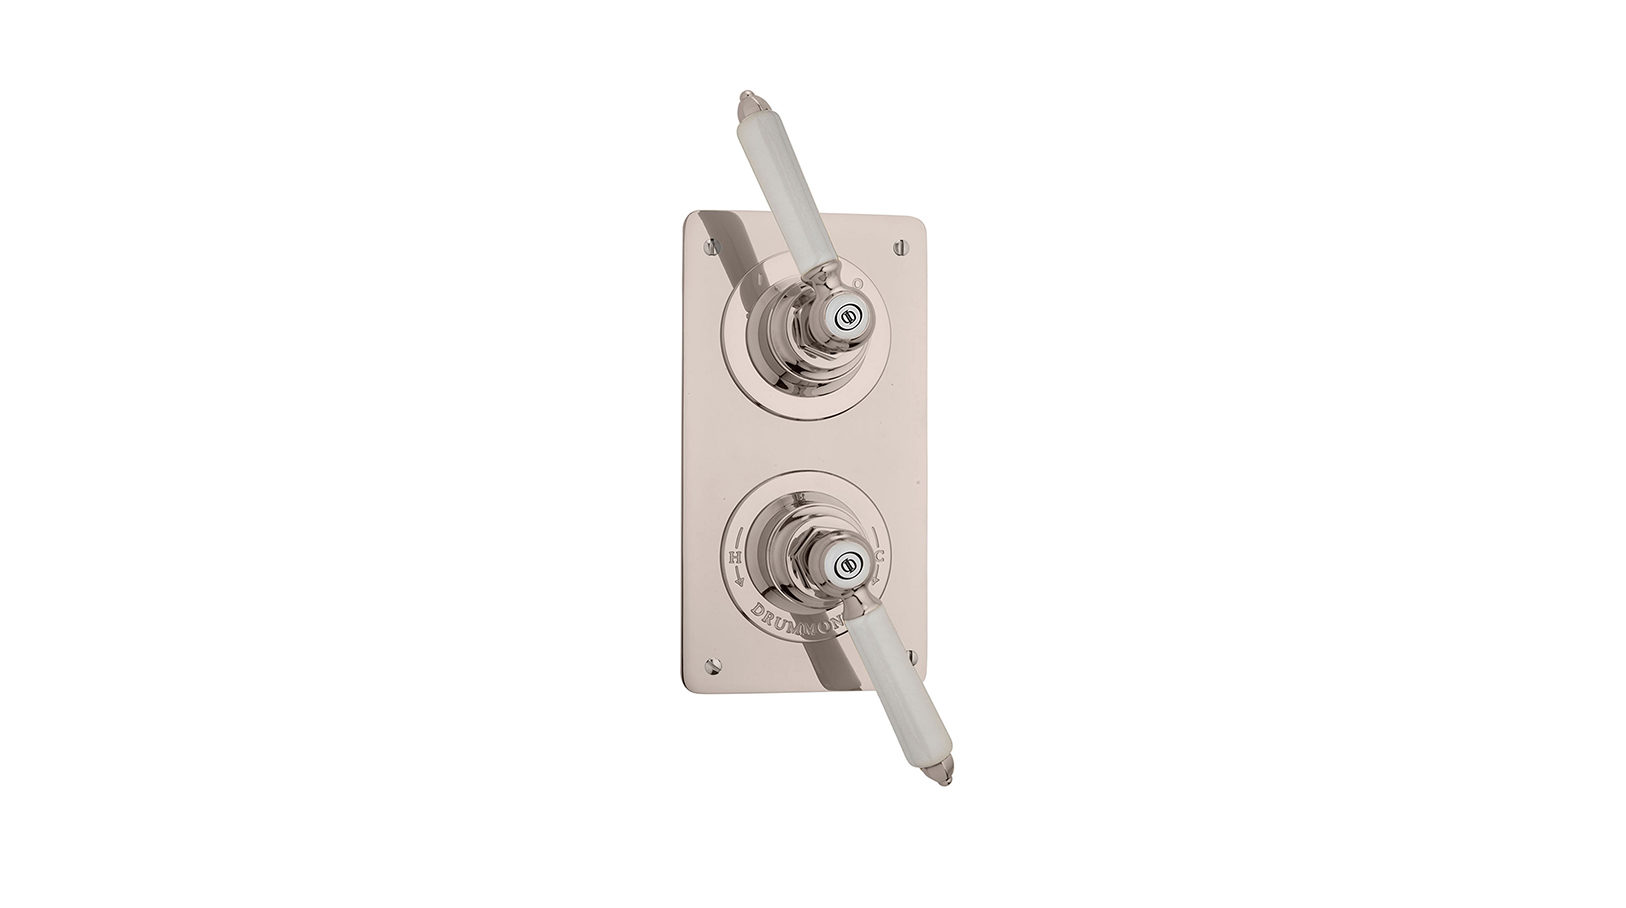 The Chessleton Shower Plate Thermo & On/Off